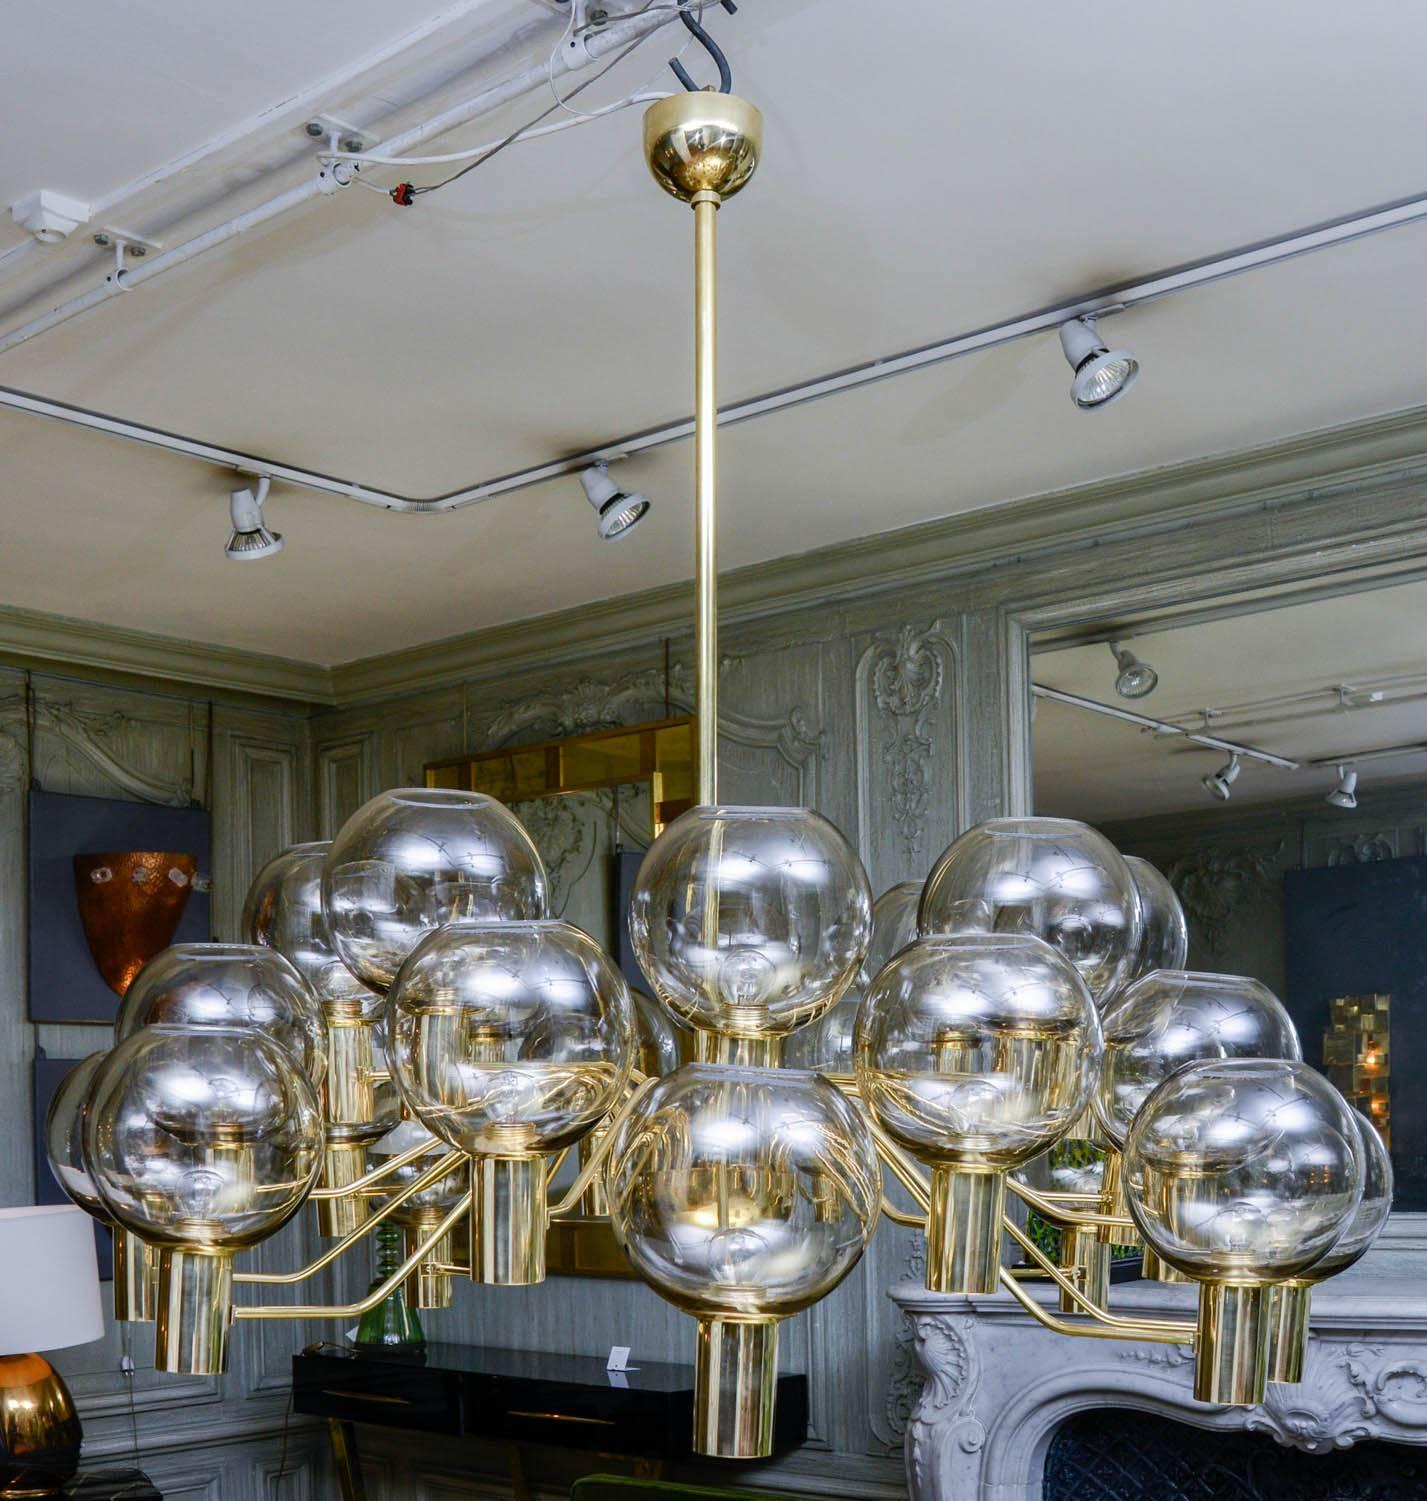 Chandelier with a brass structure and 24 smoked glass globes